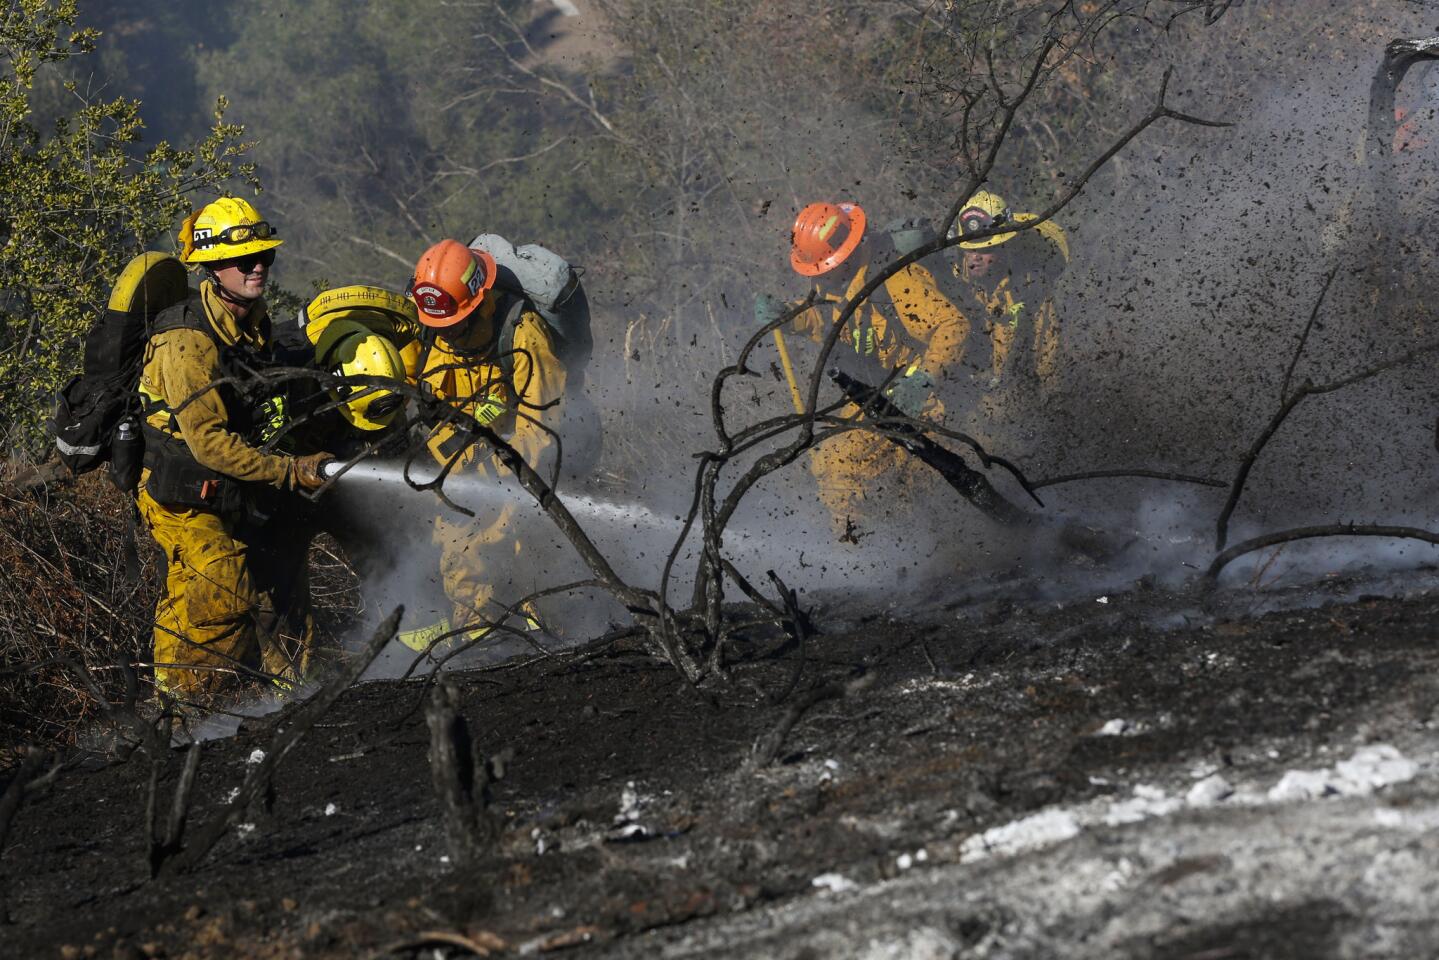 Firefighters work to extinguish a wildfire on a hillside in Griffith Park on Saturday, September 5, 2015 in Los Angeles, Calif. About 100 firefighters, assisted by water-dropping helicopters, battled the blaze and were able to douse it by 4 p.m.